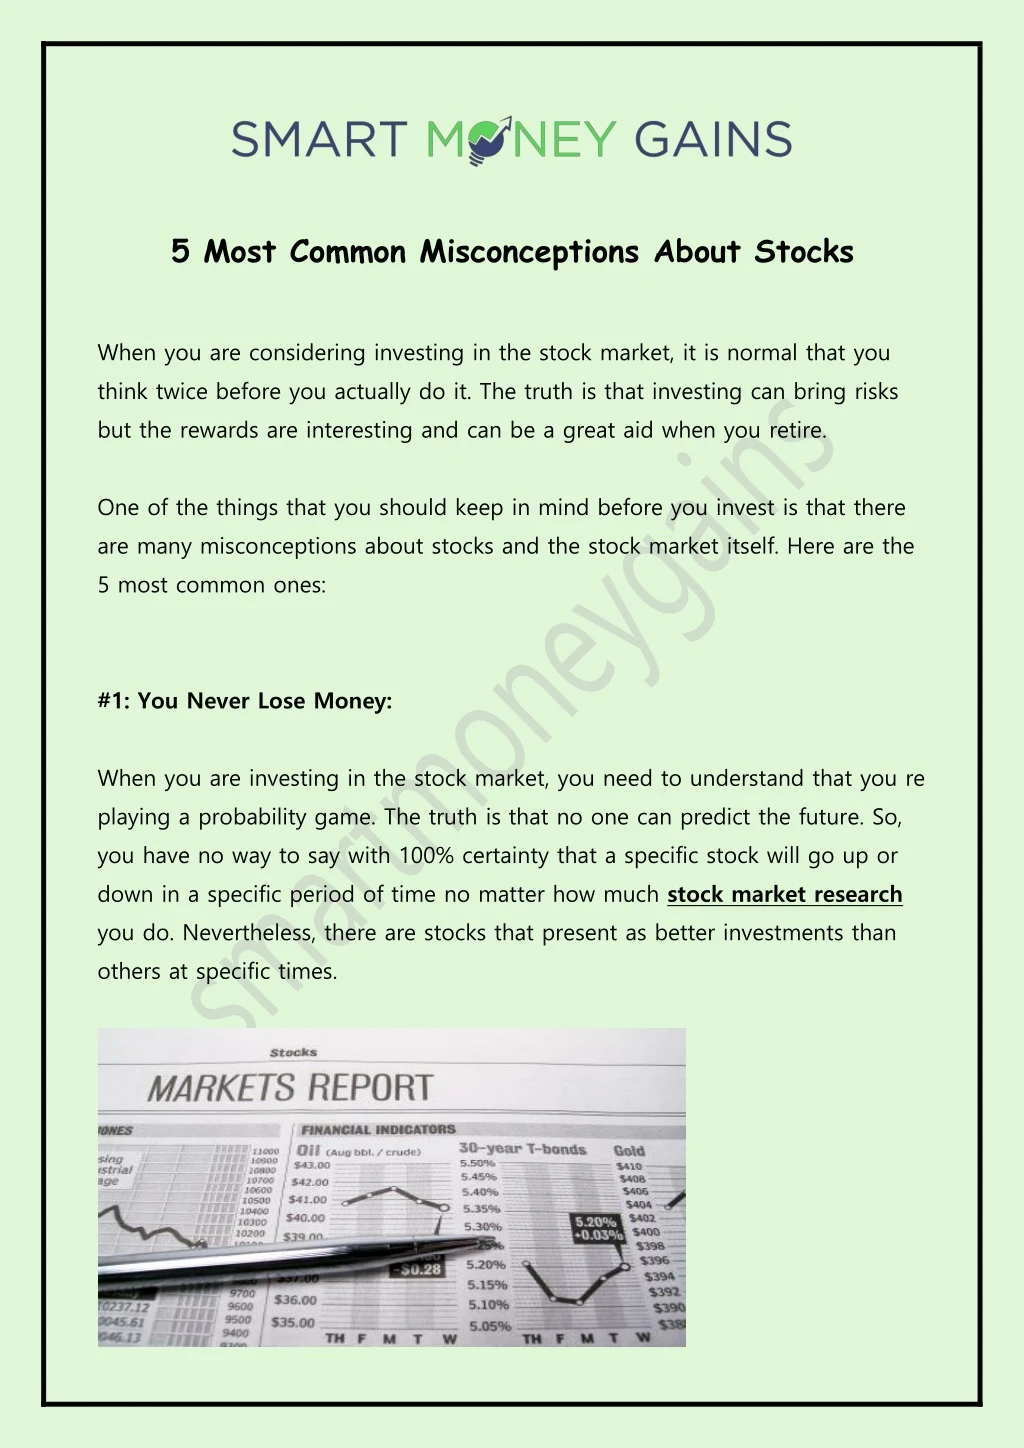 5 most common misconceptions about stocks